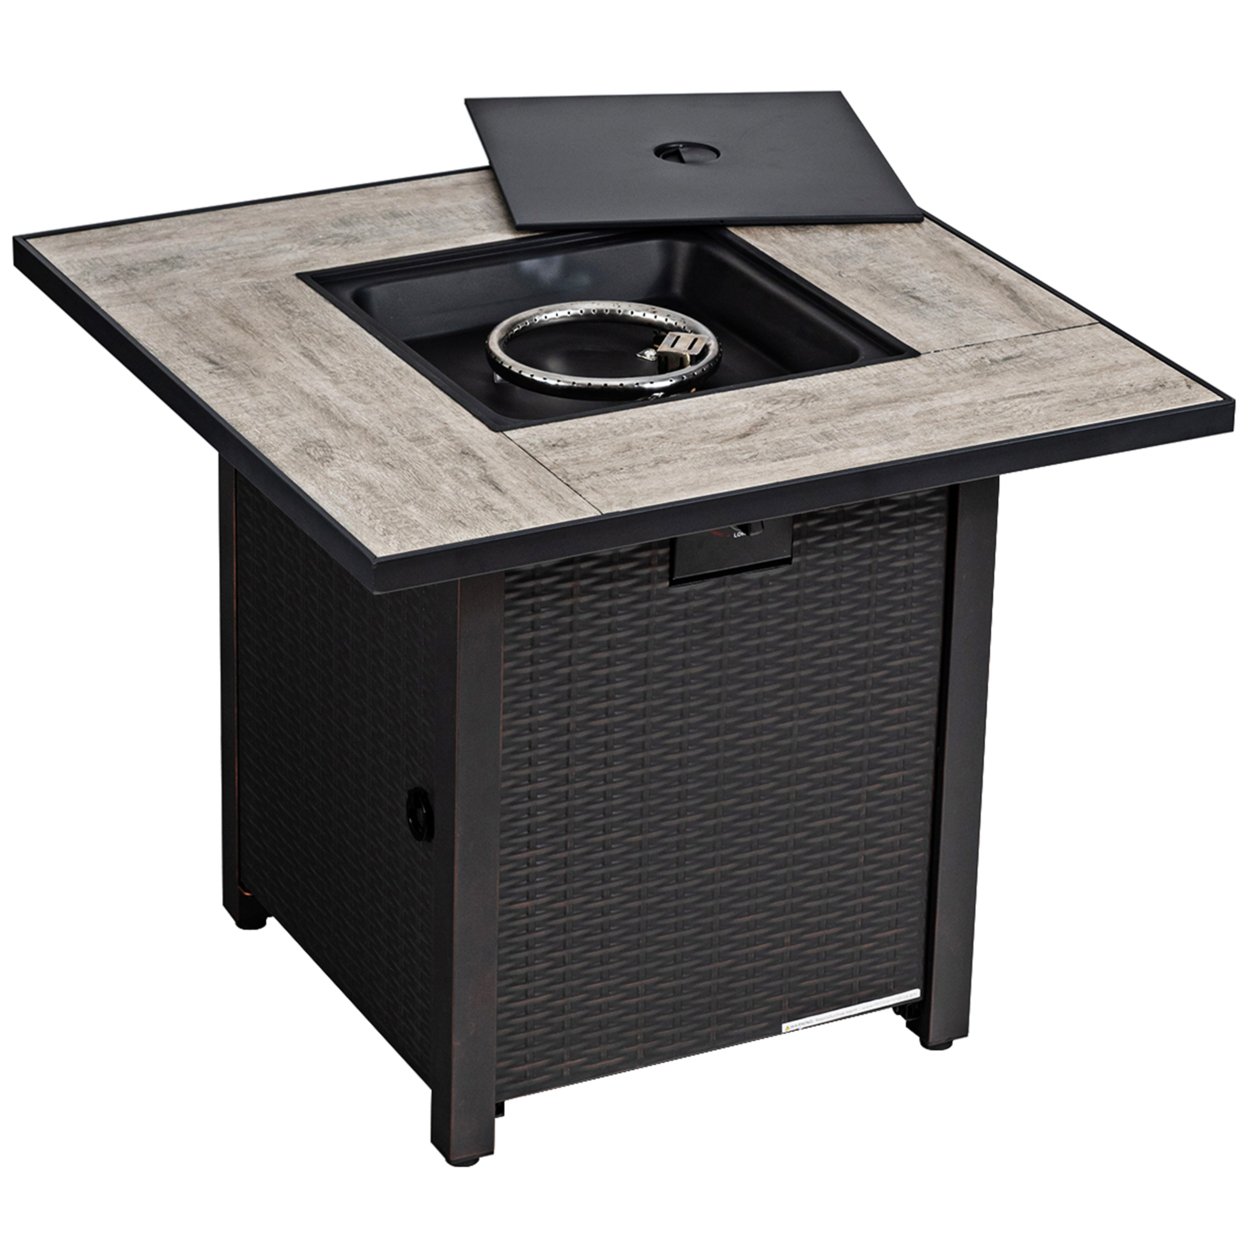 30'' Gas Fire Table 50,000 BTU Square Propane Fire Pit Table Patio Yard